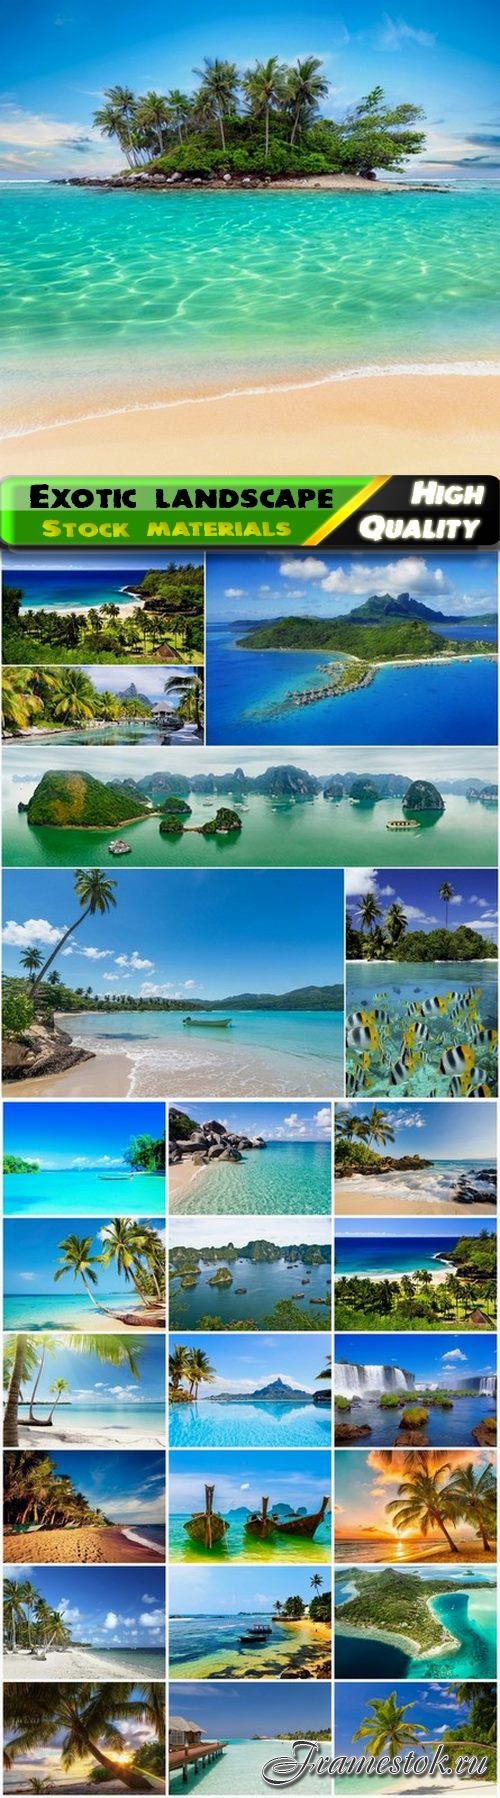 Exotic landscape with beach and palm tree and paradise - 25 HQ Jpg